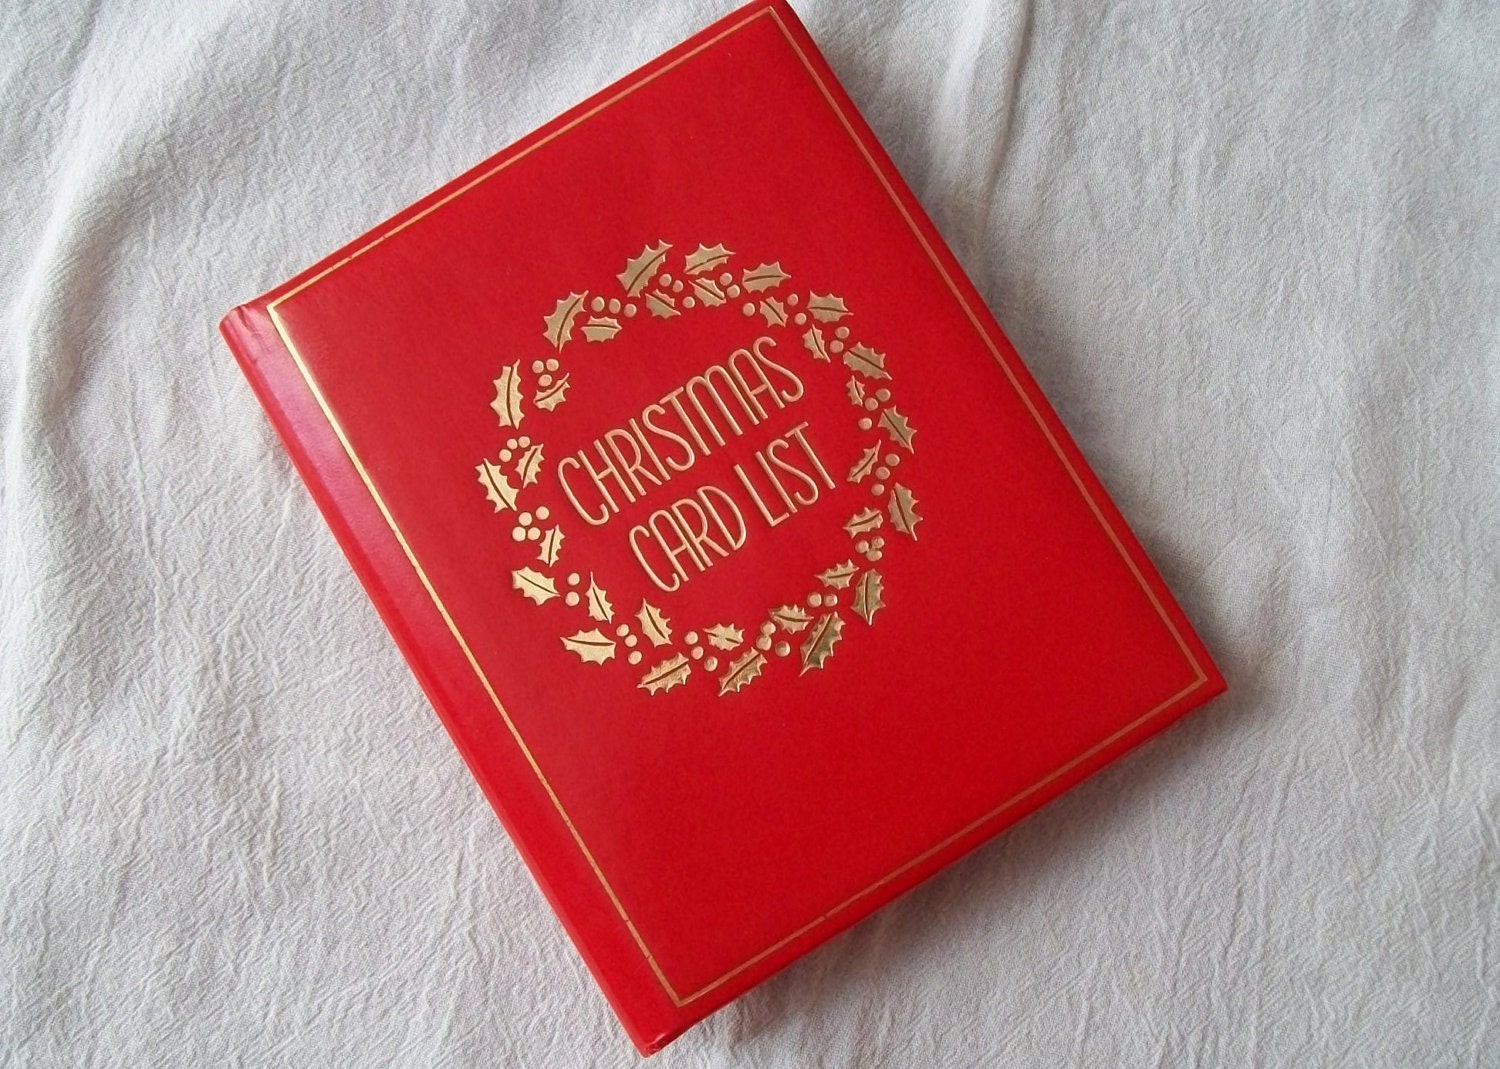 Christmas Card Address Book by VintagePlusCrafts on Etsy